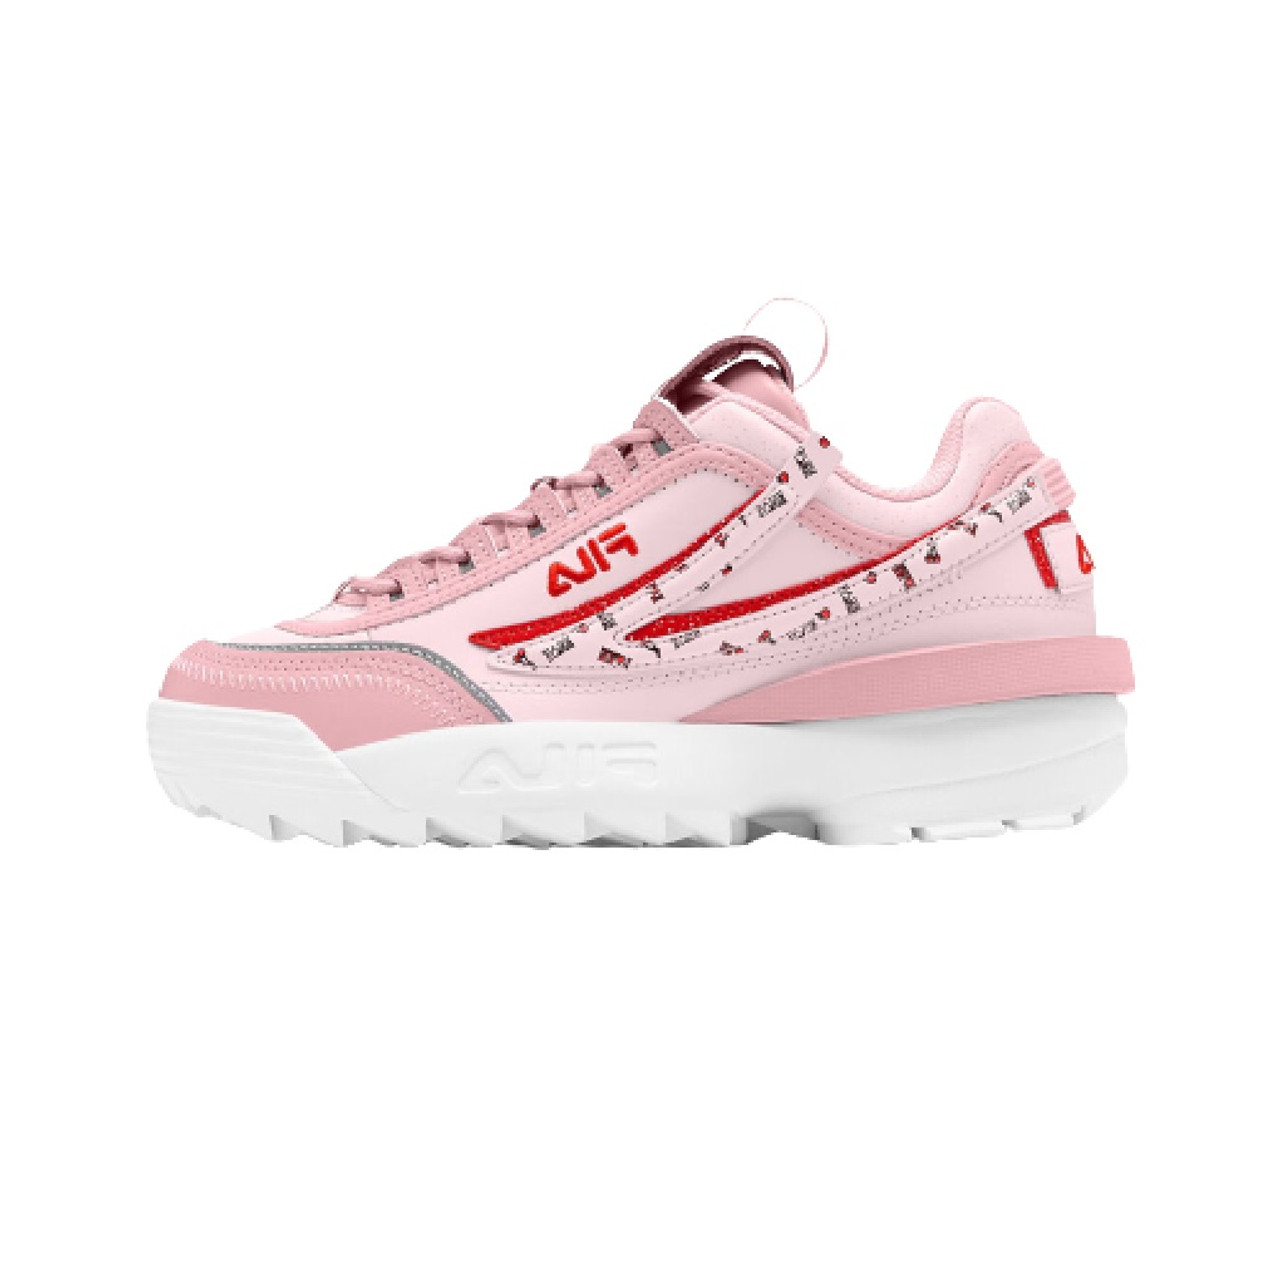 Share more than 170 sneakers femme soldes best